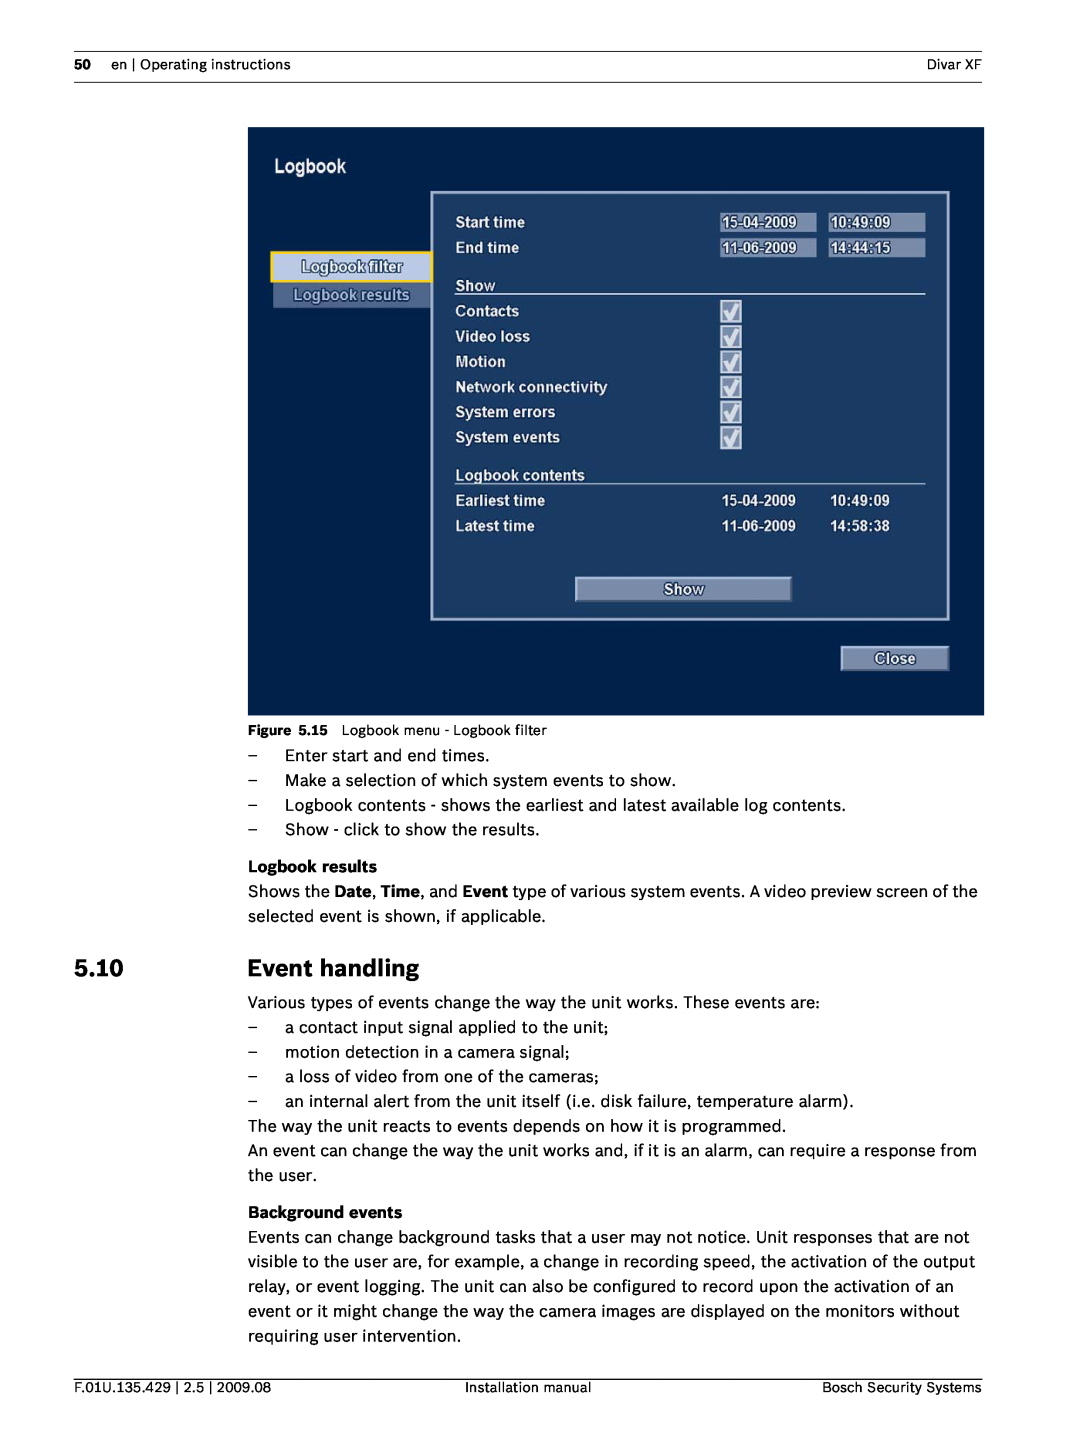 Bosch Appliances XF installation manual 5.10, Event handling, Logbook results, Background events 